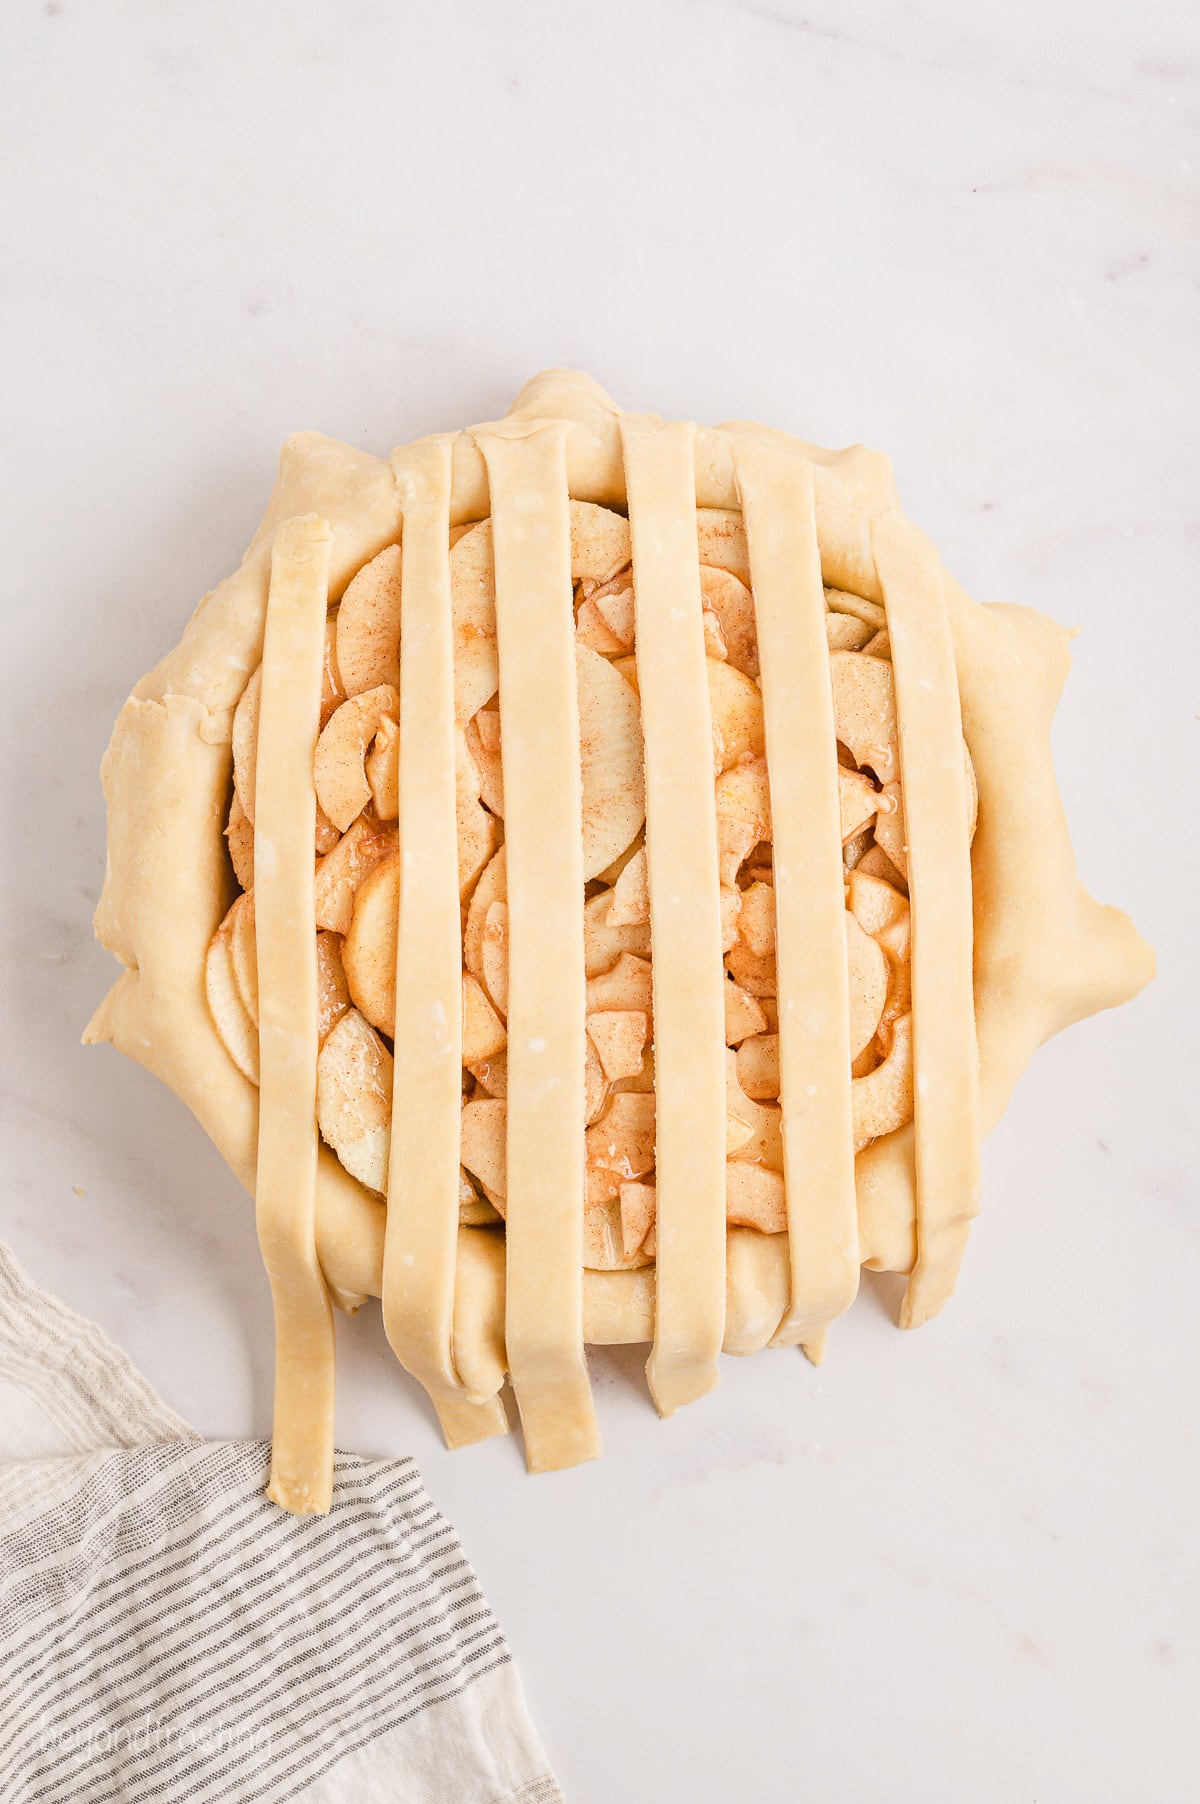 Pie crust strips placed over a pie shell filled with pie filling.